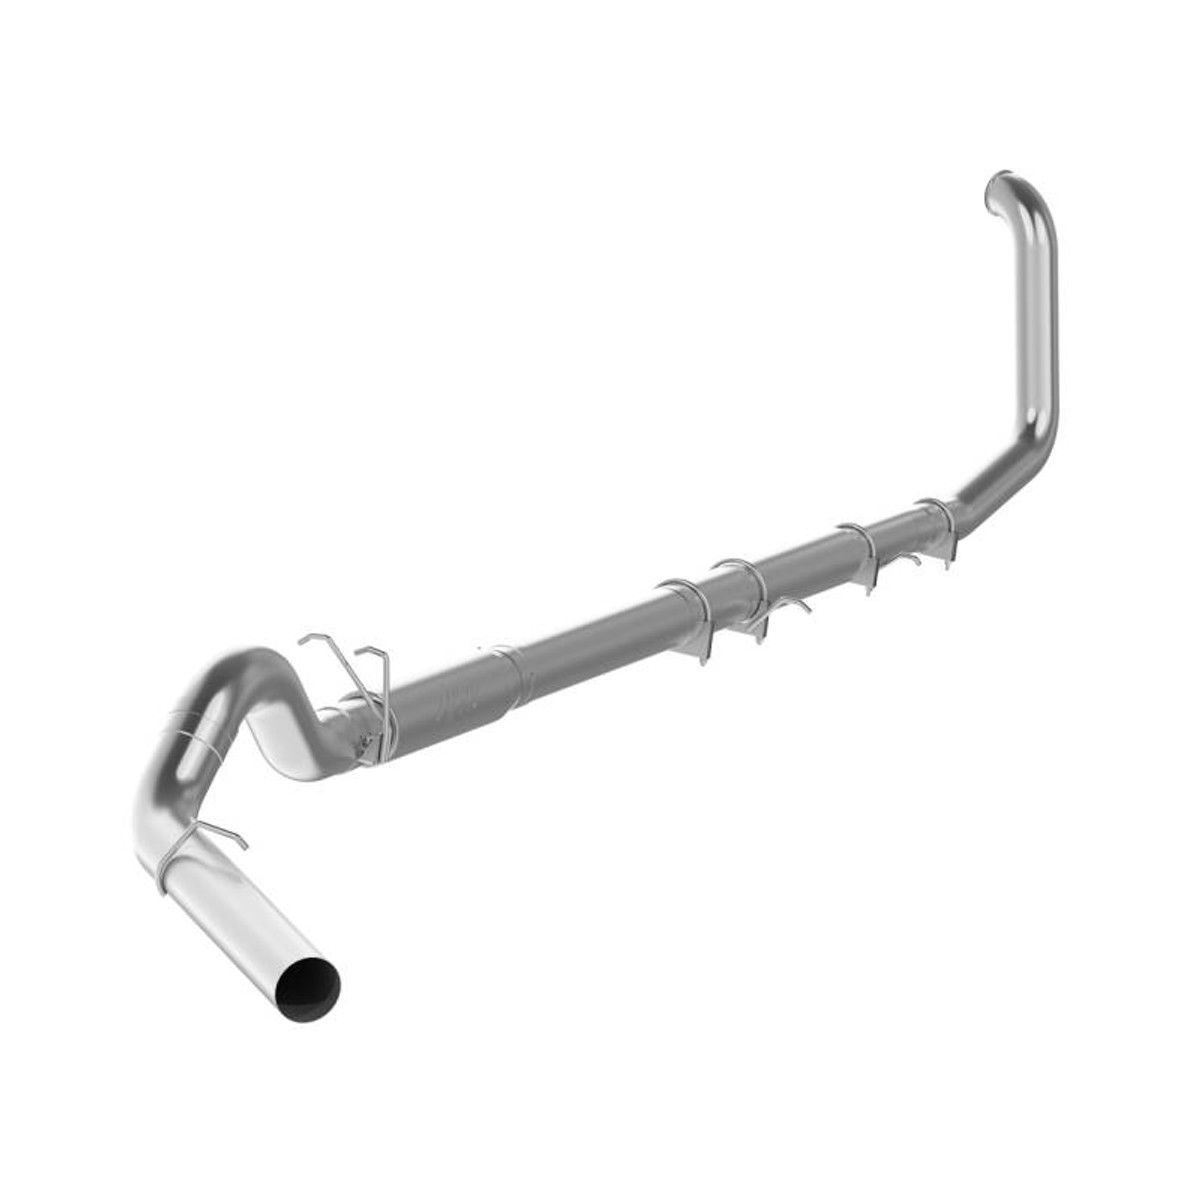 MBRP Performance Series - 5 Inch - AL - Turbo Back Off Road Single Side Exit No Muffler Exhaust - 1999-2003 Ford F-250/350 7.3L S62220P